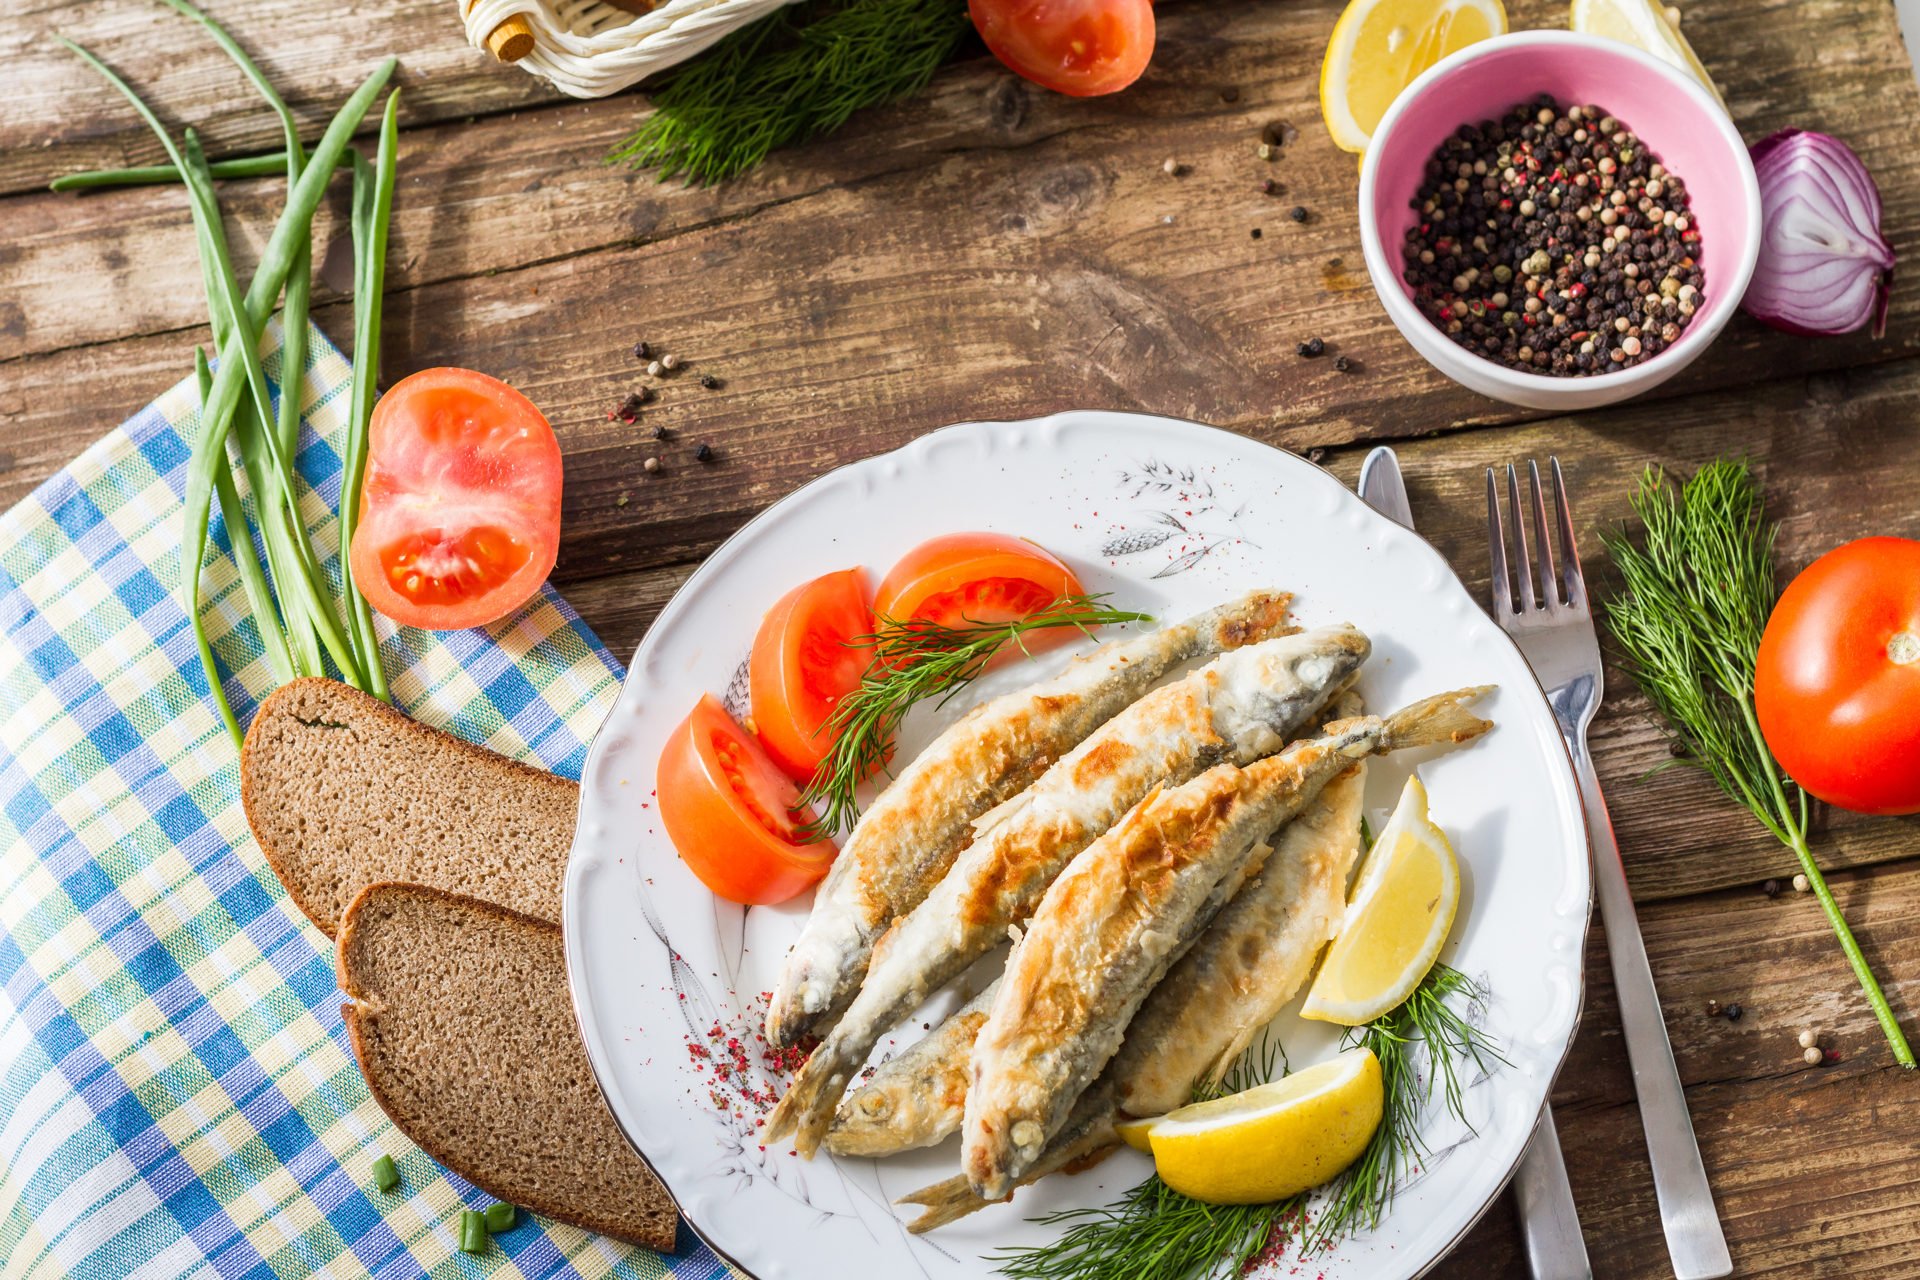 Fried fish smelt on a plate, served with lemon, tomatoes, onions and herbs